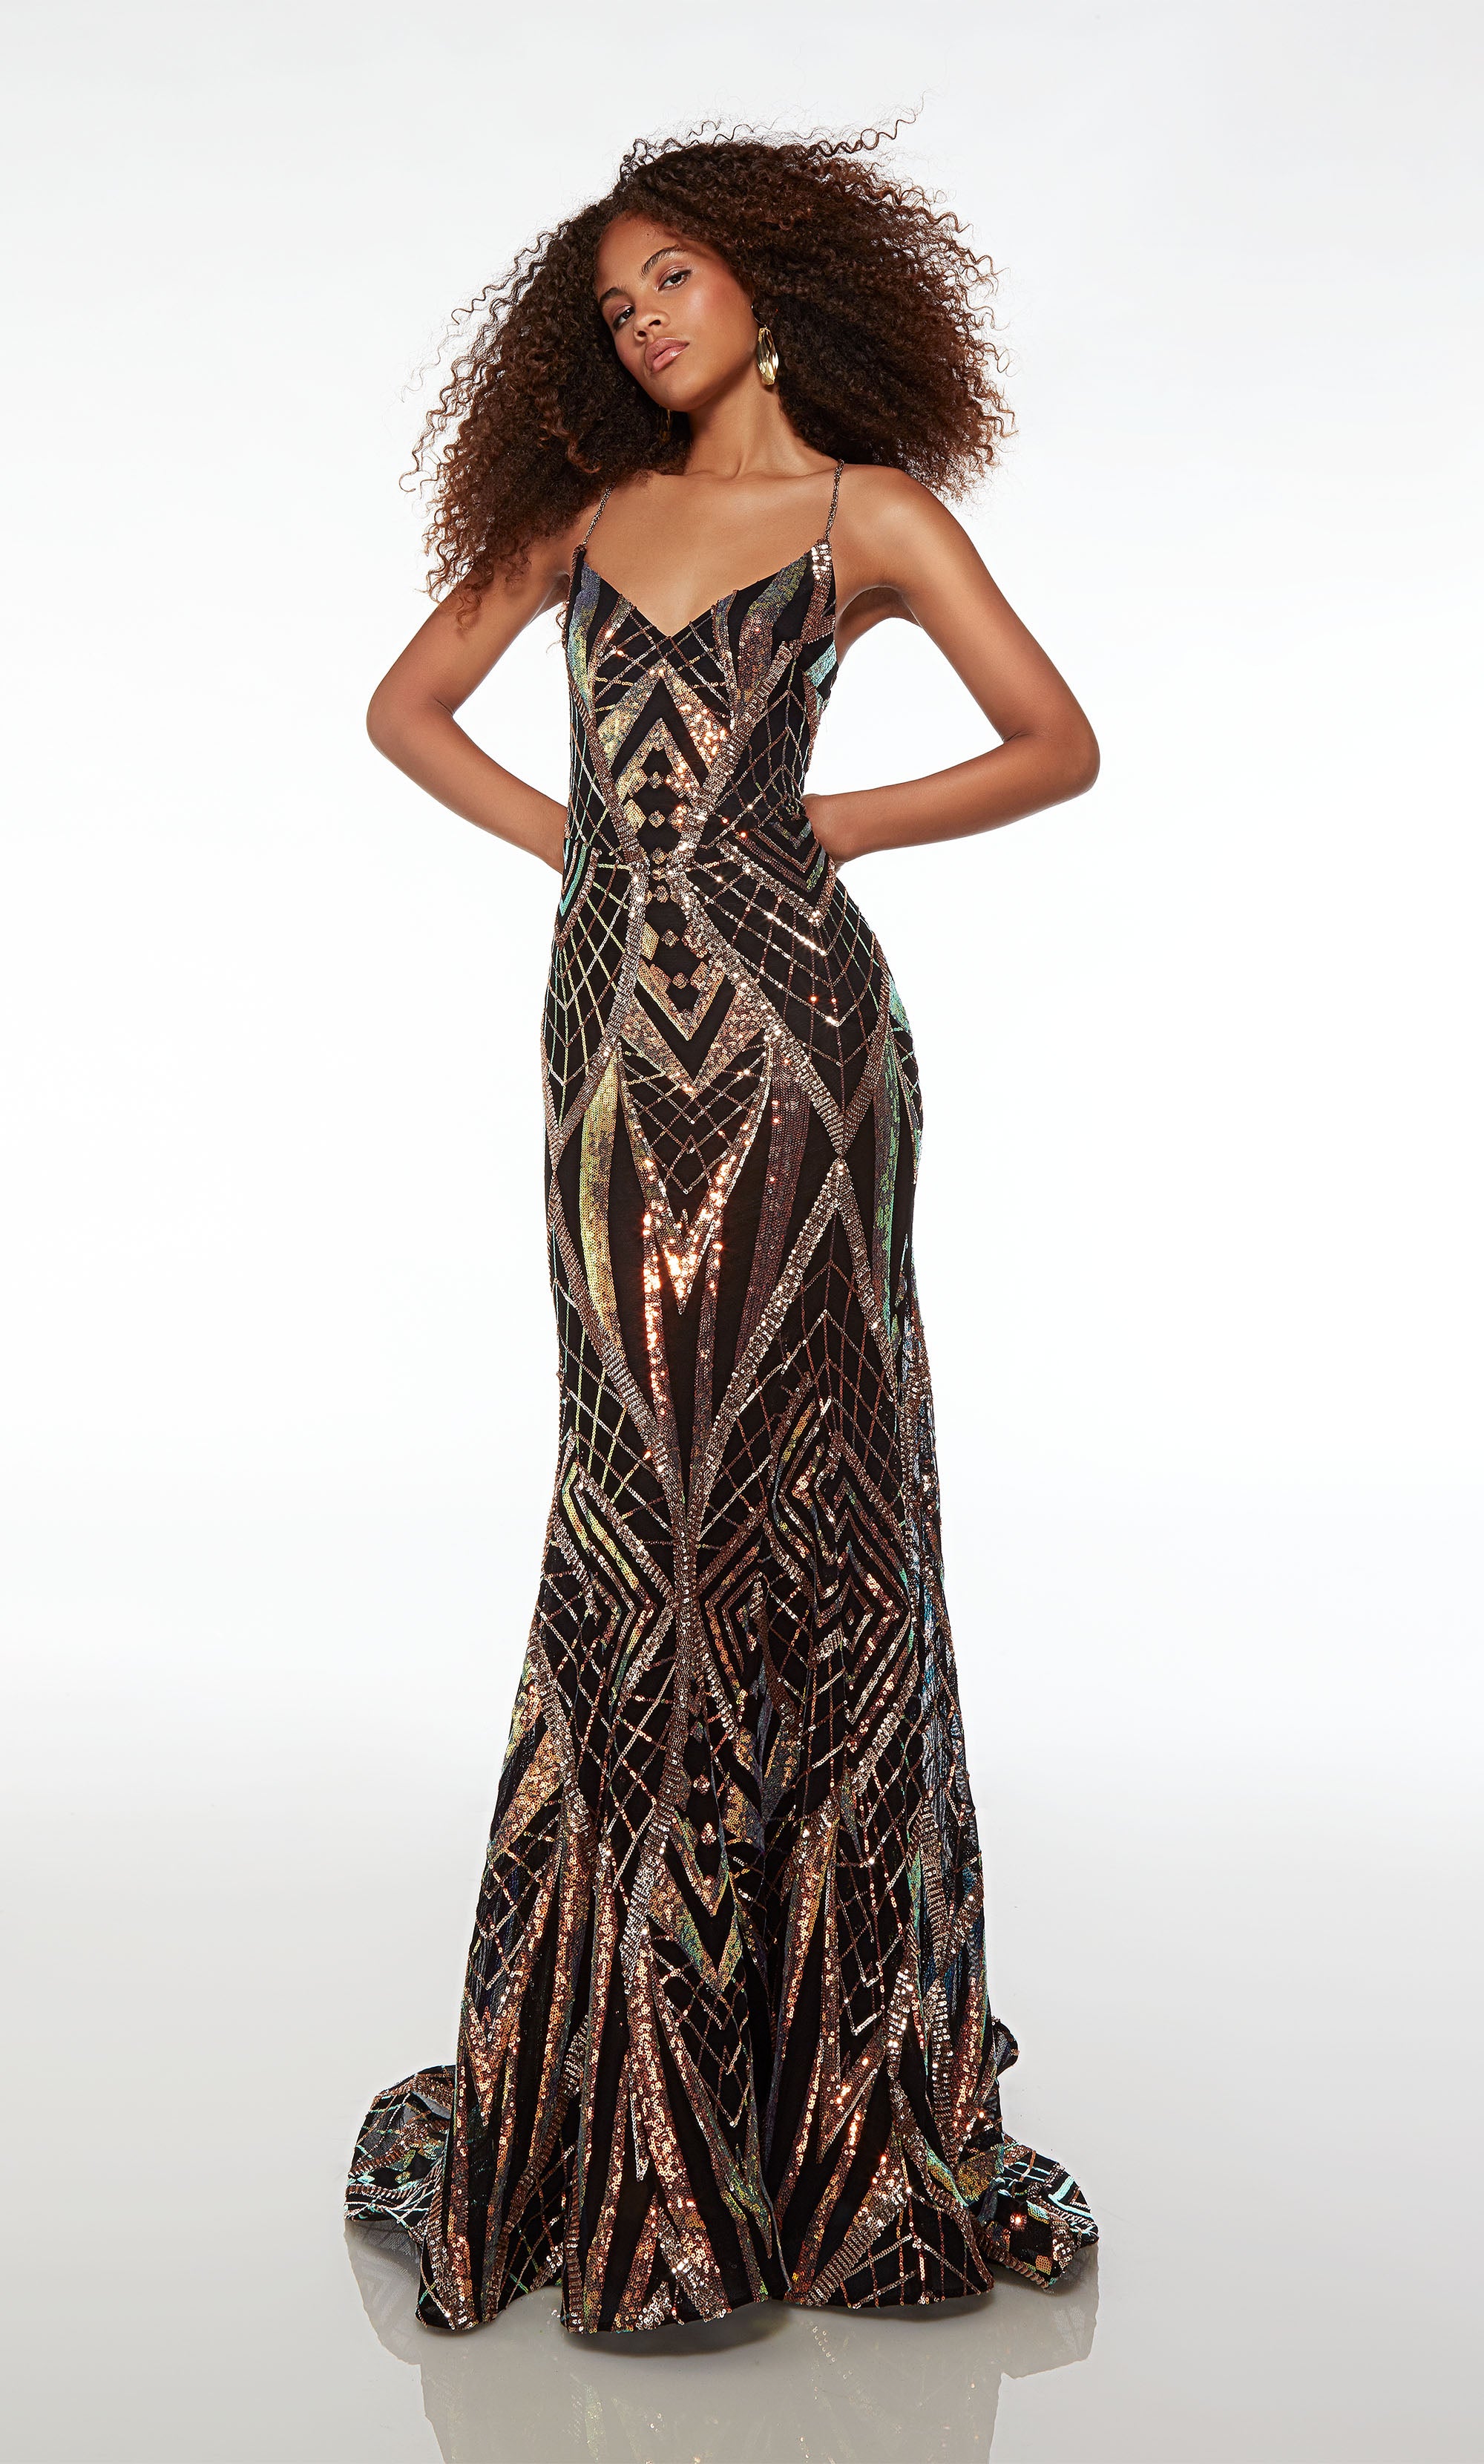 Breathtaking black-gold formal gown: mermaid silhouette, V neckline, lace-up back, train, and an beautiful iridescent sequin design for an stunning allure.